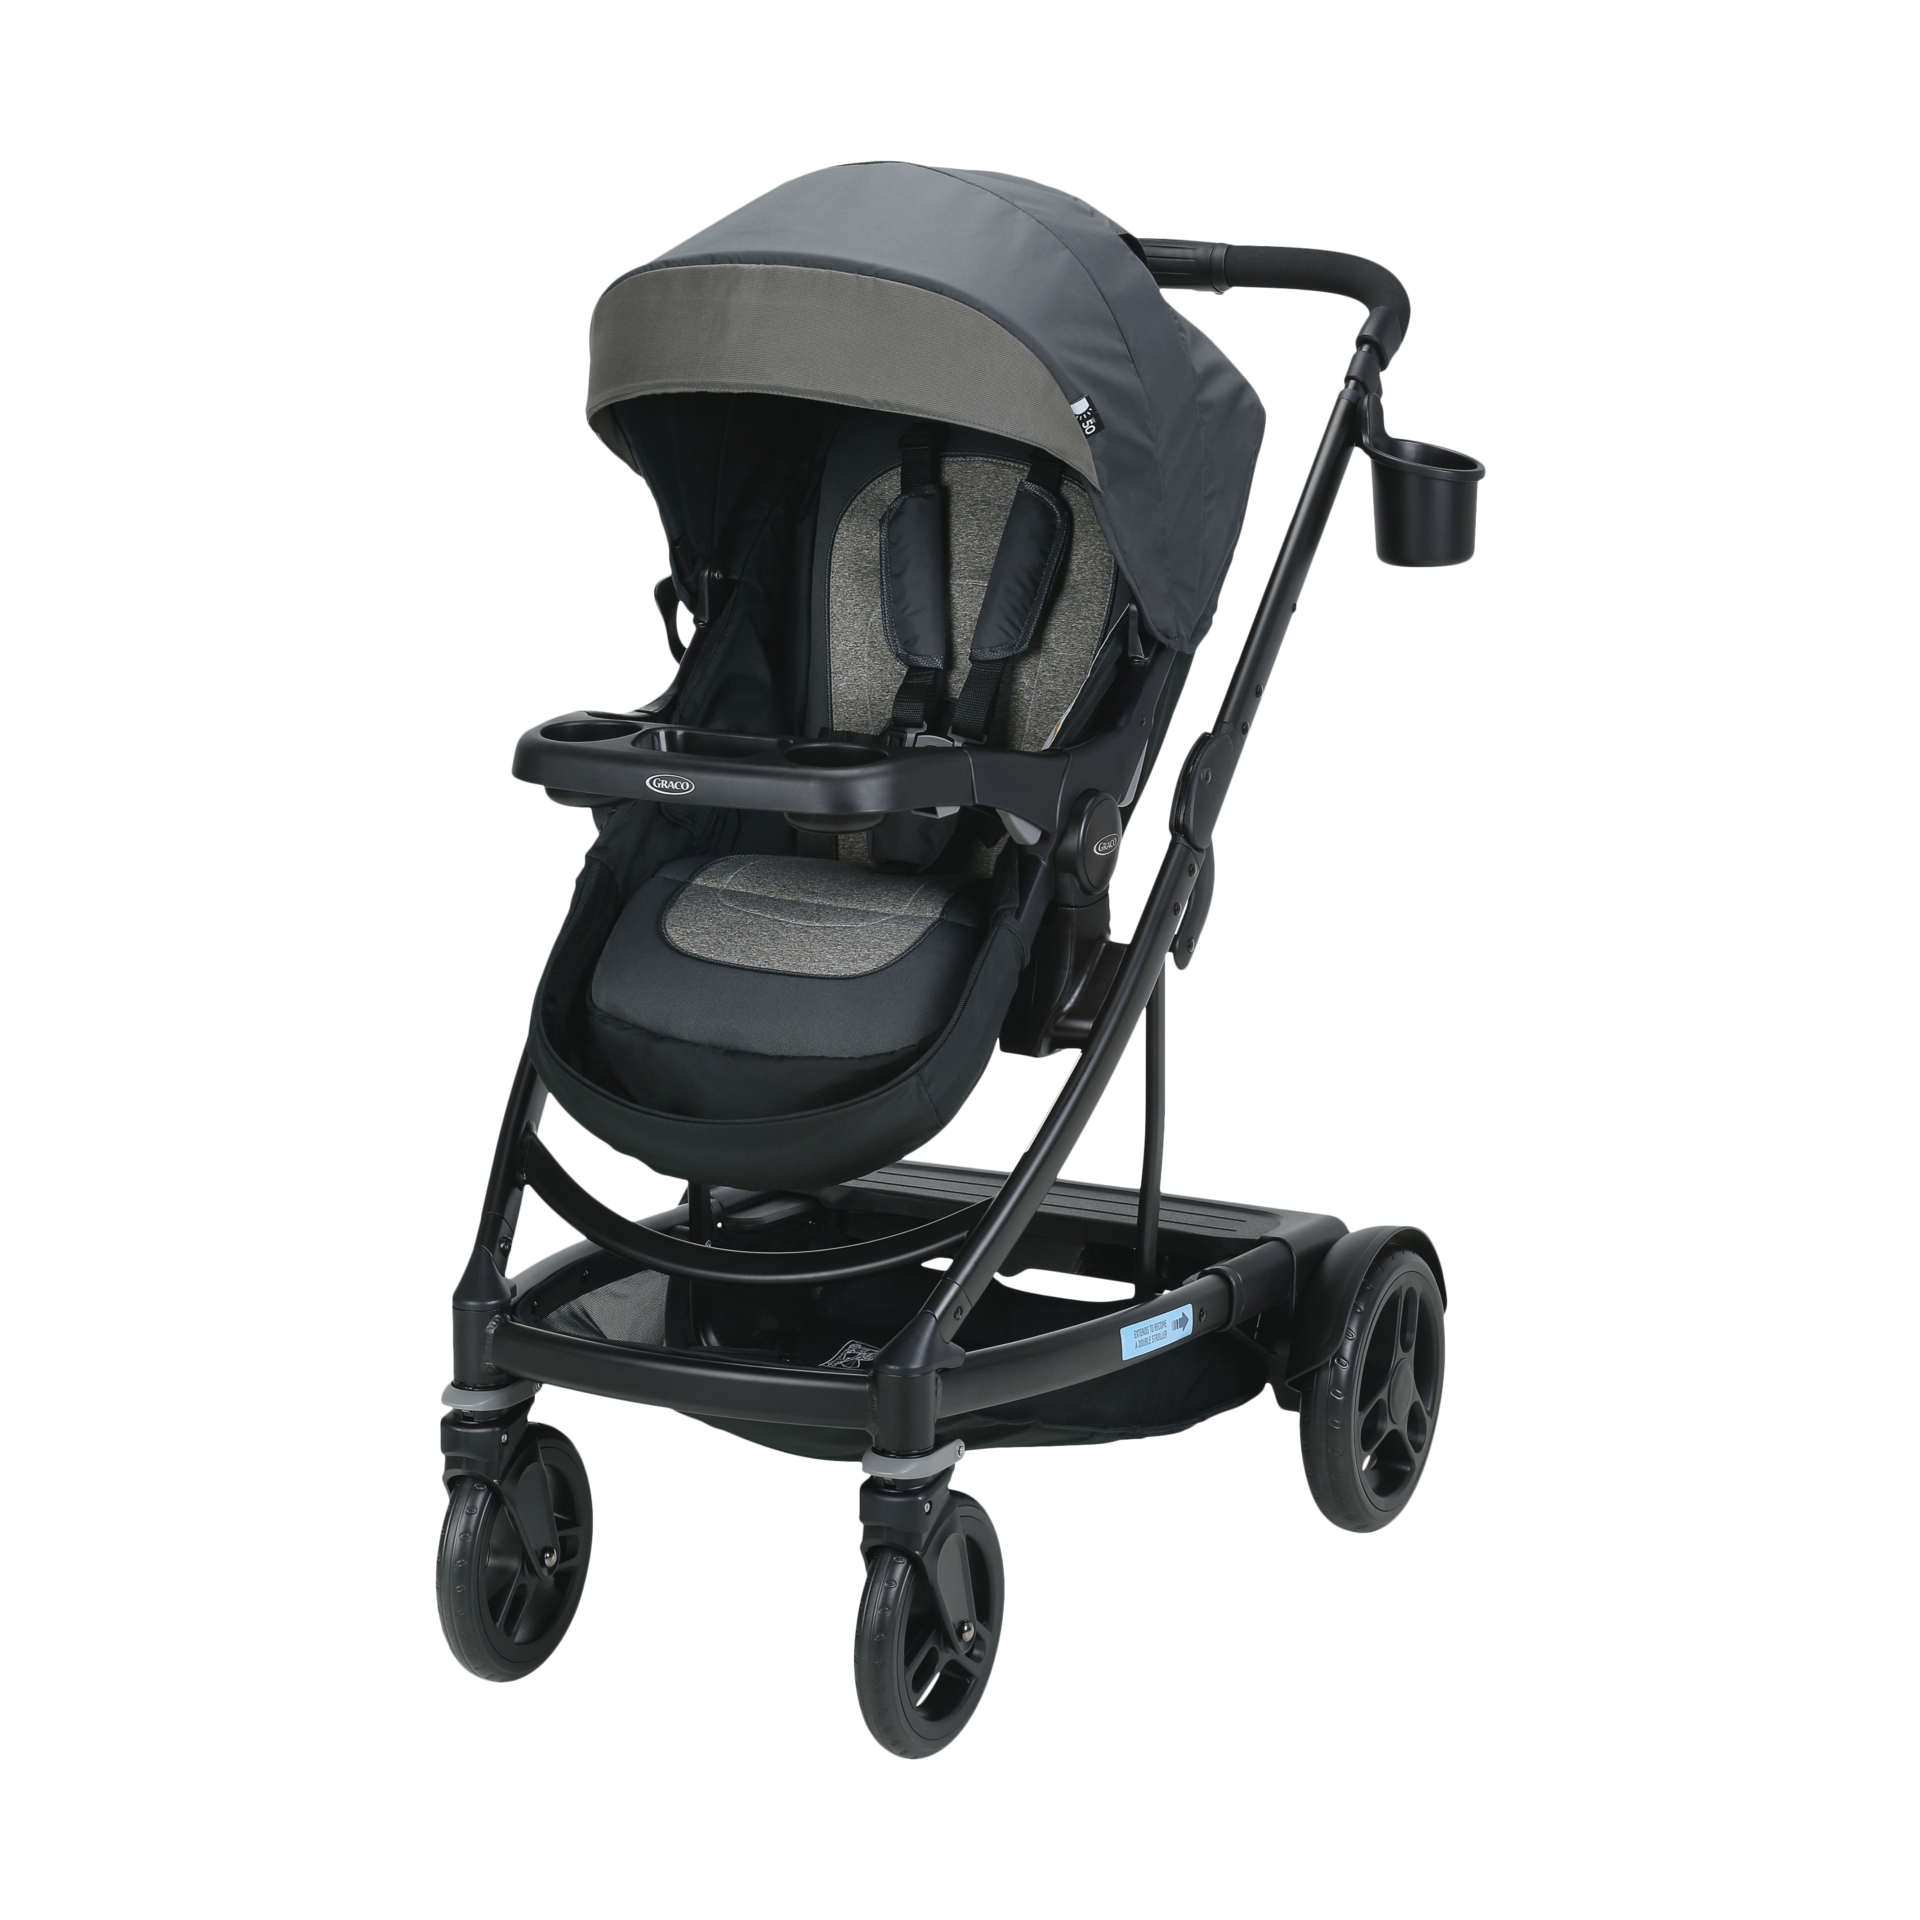 graco double stroller weight limit